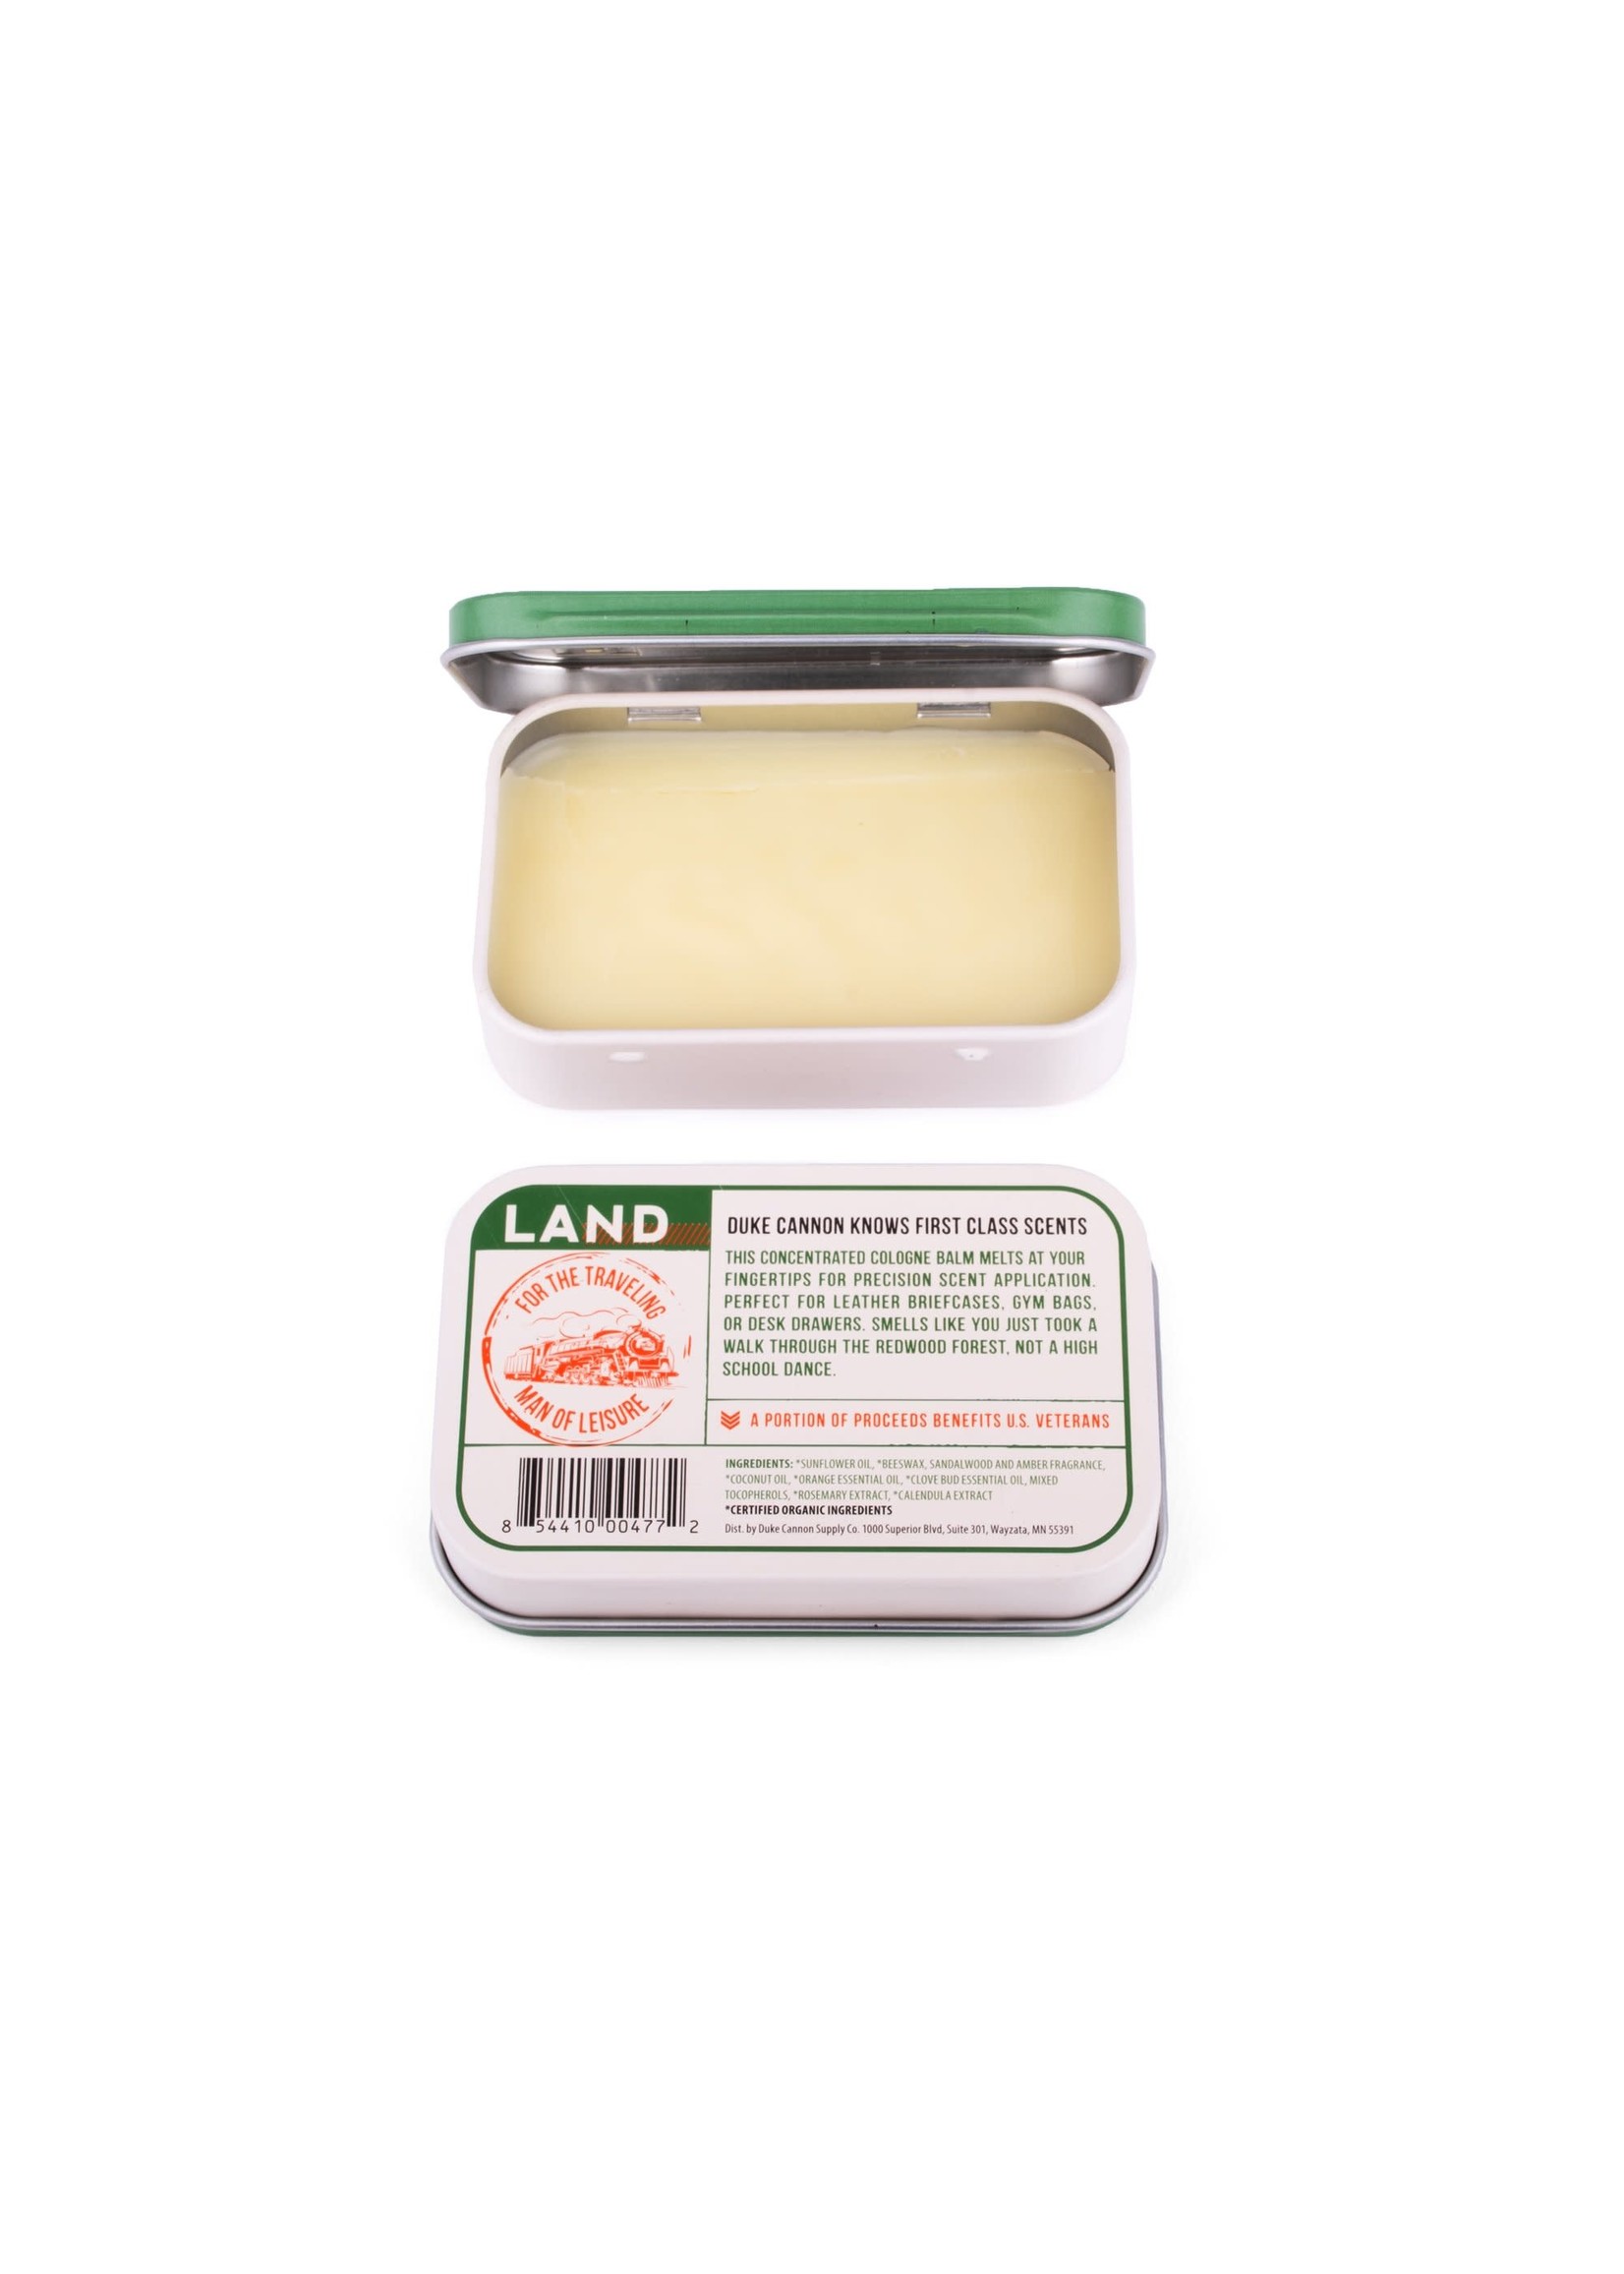 Duke Cannon Supply Solid Cologne - Land